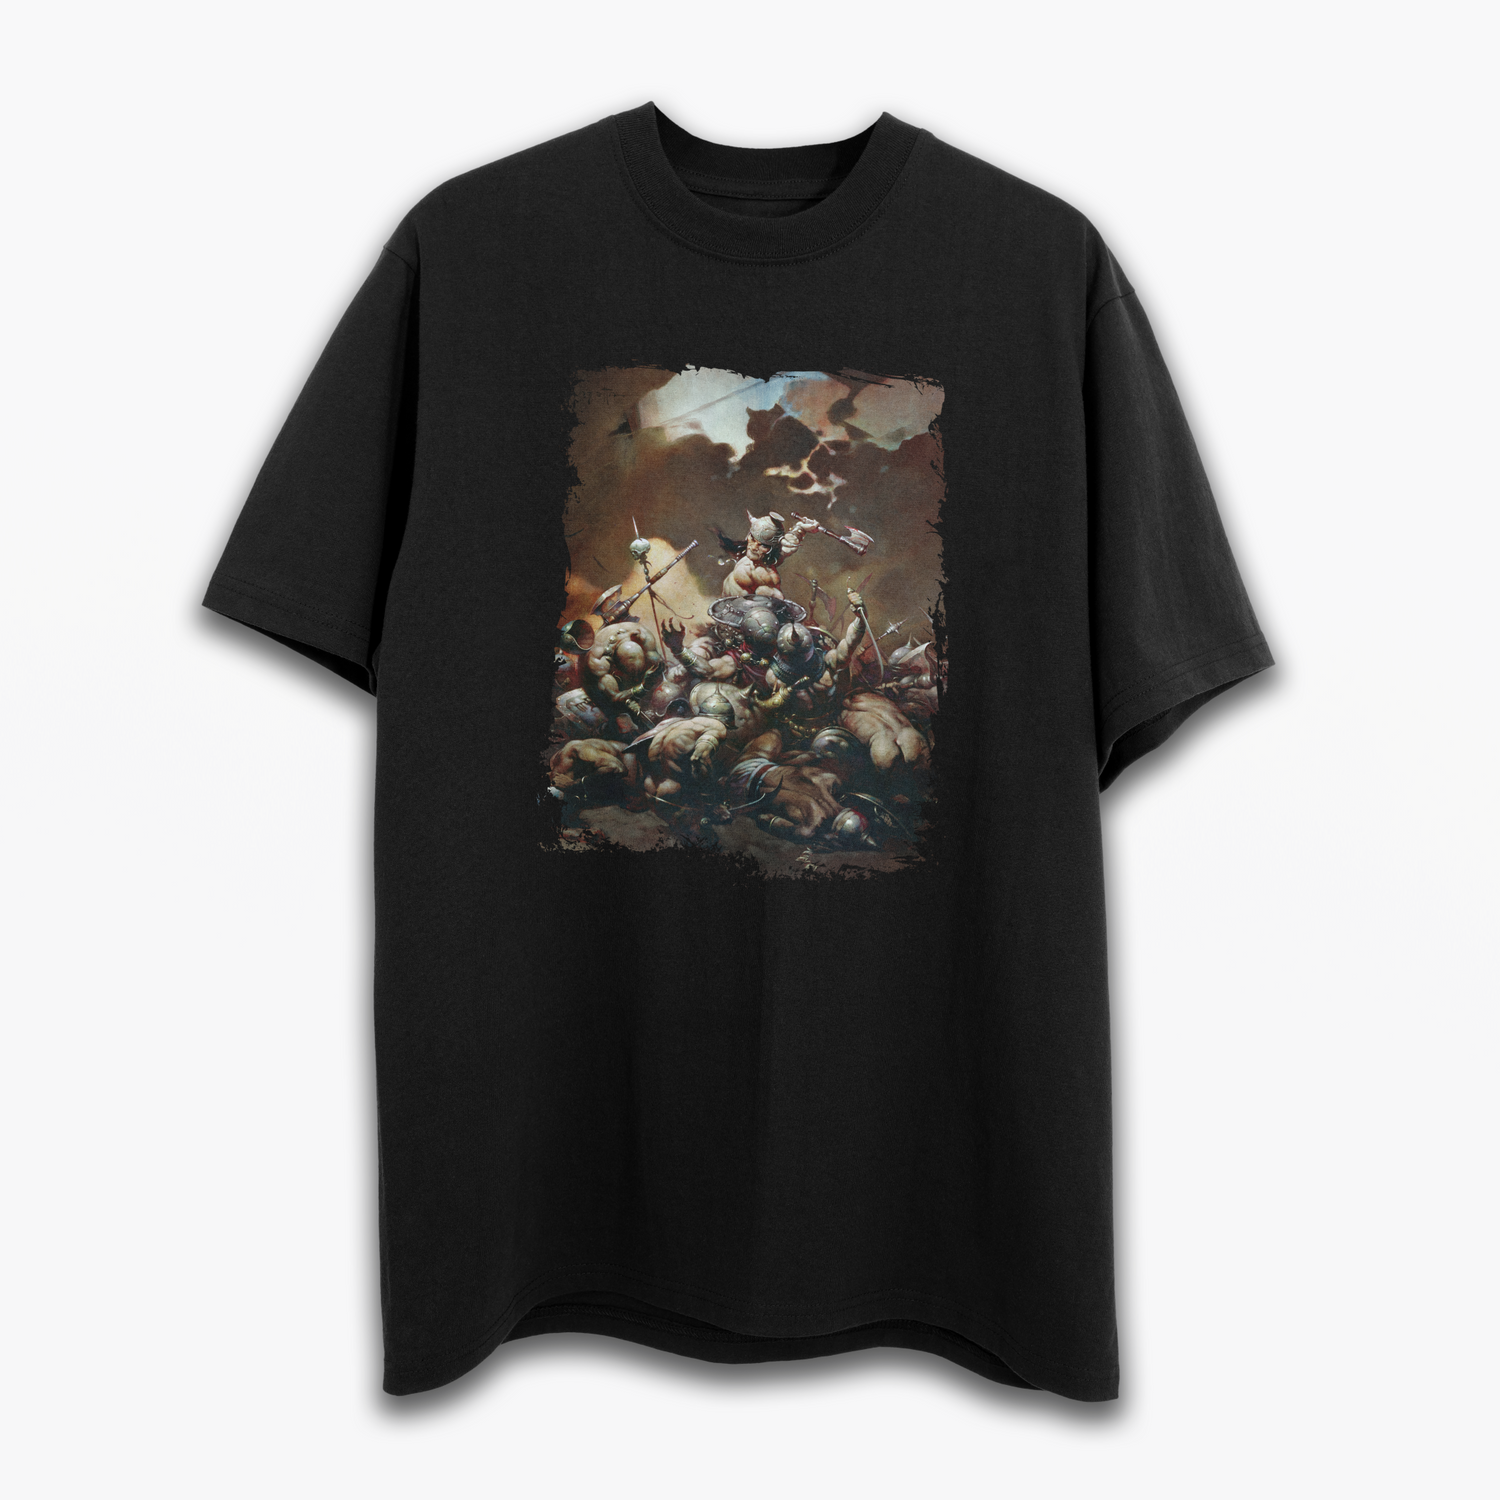 The Destroyer T-Shirt